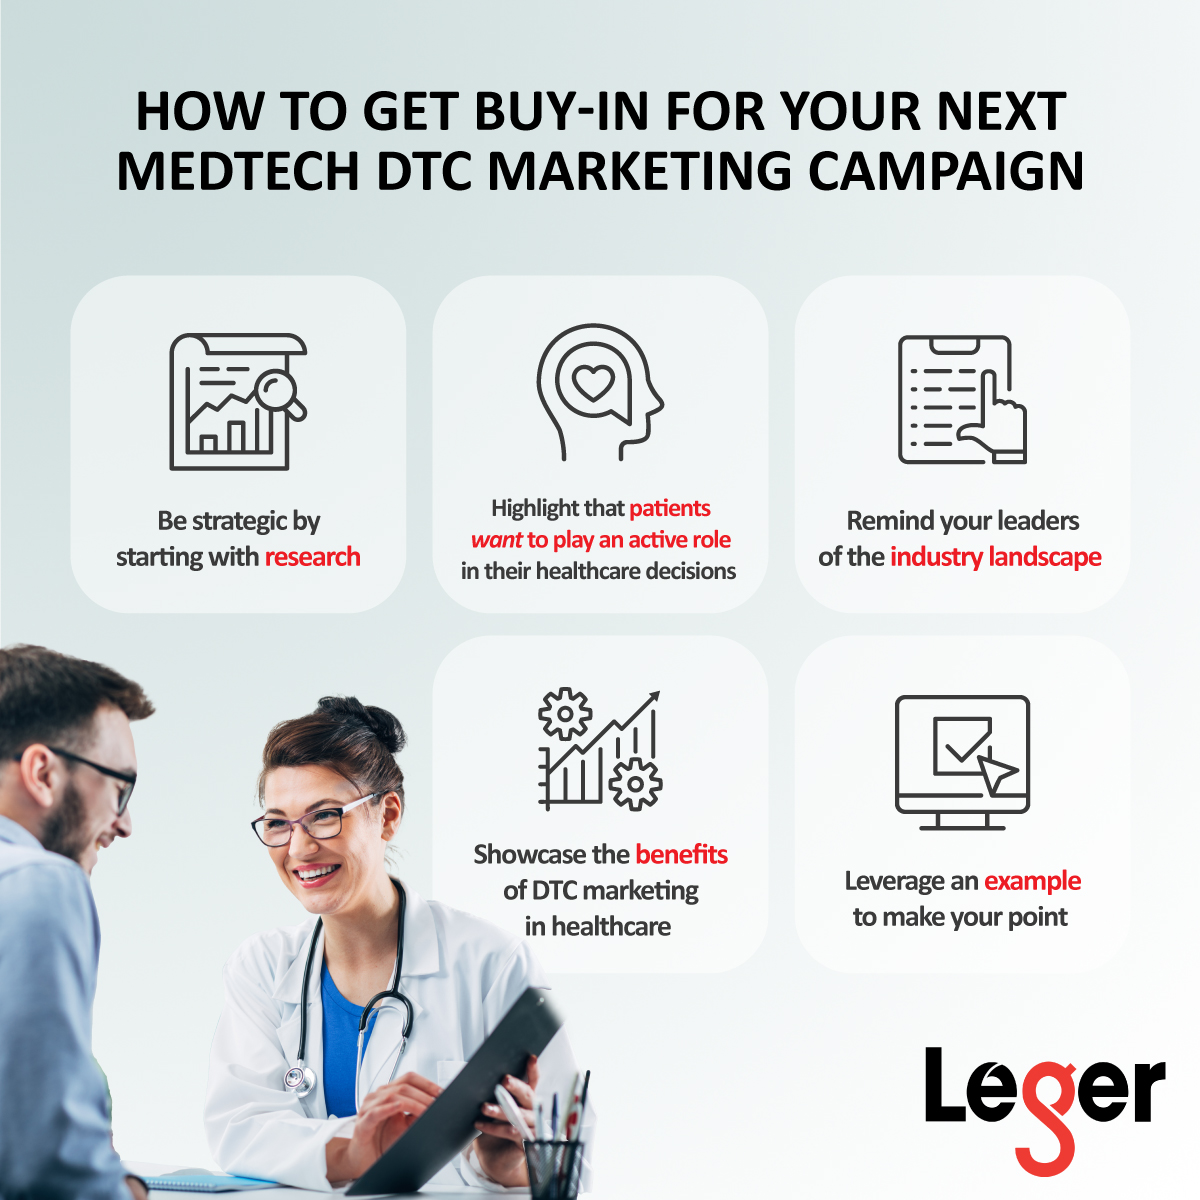 How to Get Buy-In for Your Next Medtech DTC Marketing Campaign